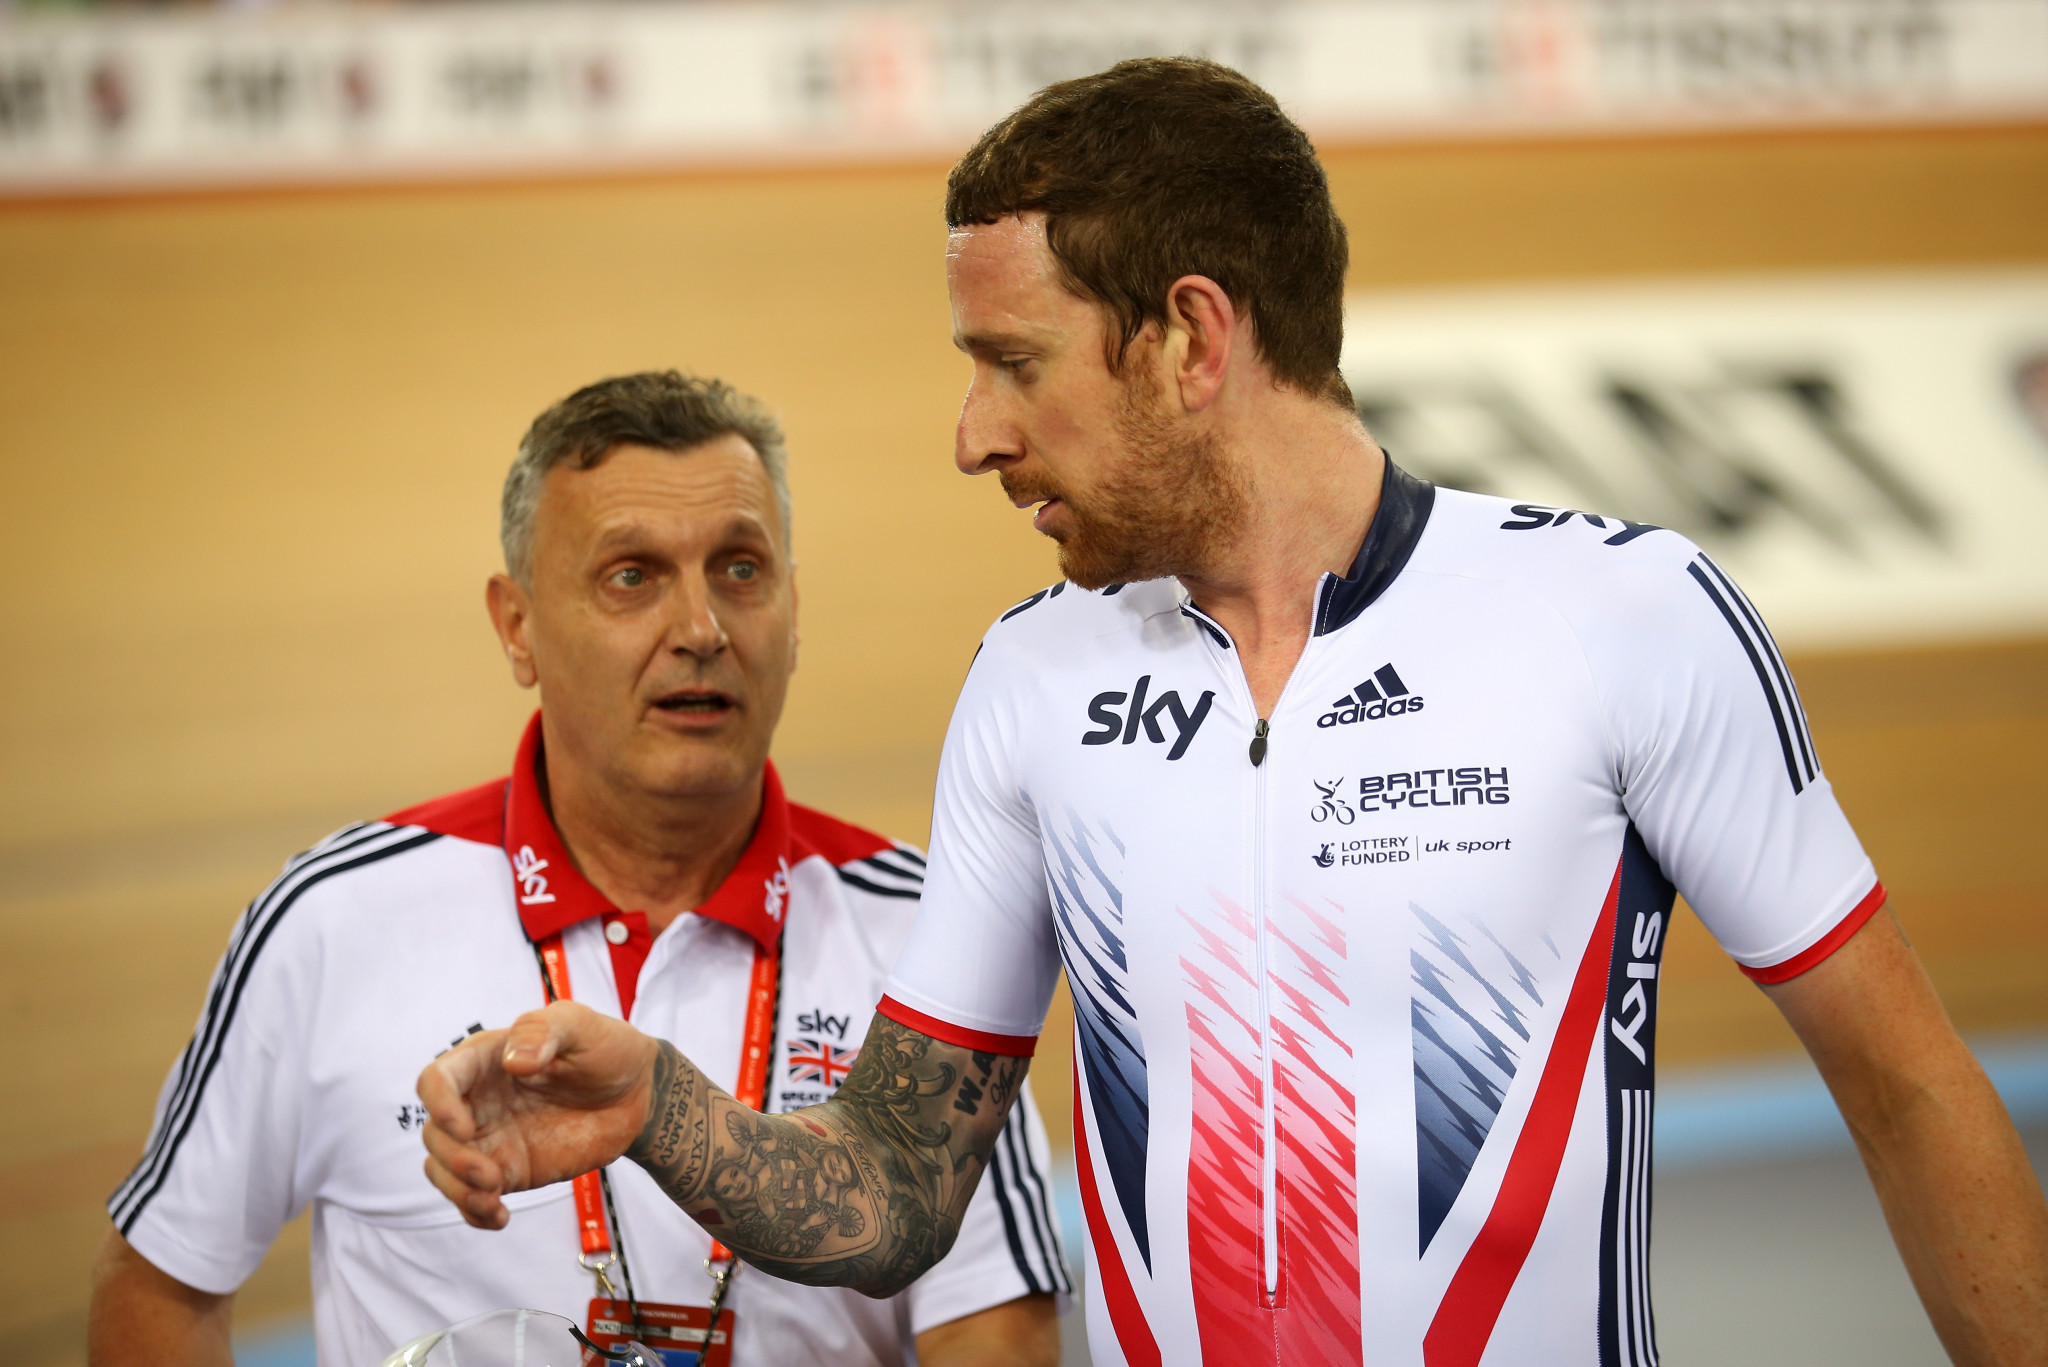 Sir Bradley Wiggins had claimed the coach was instrumental in his return to the track for Rio 2016 ©Getty Images